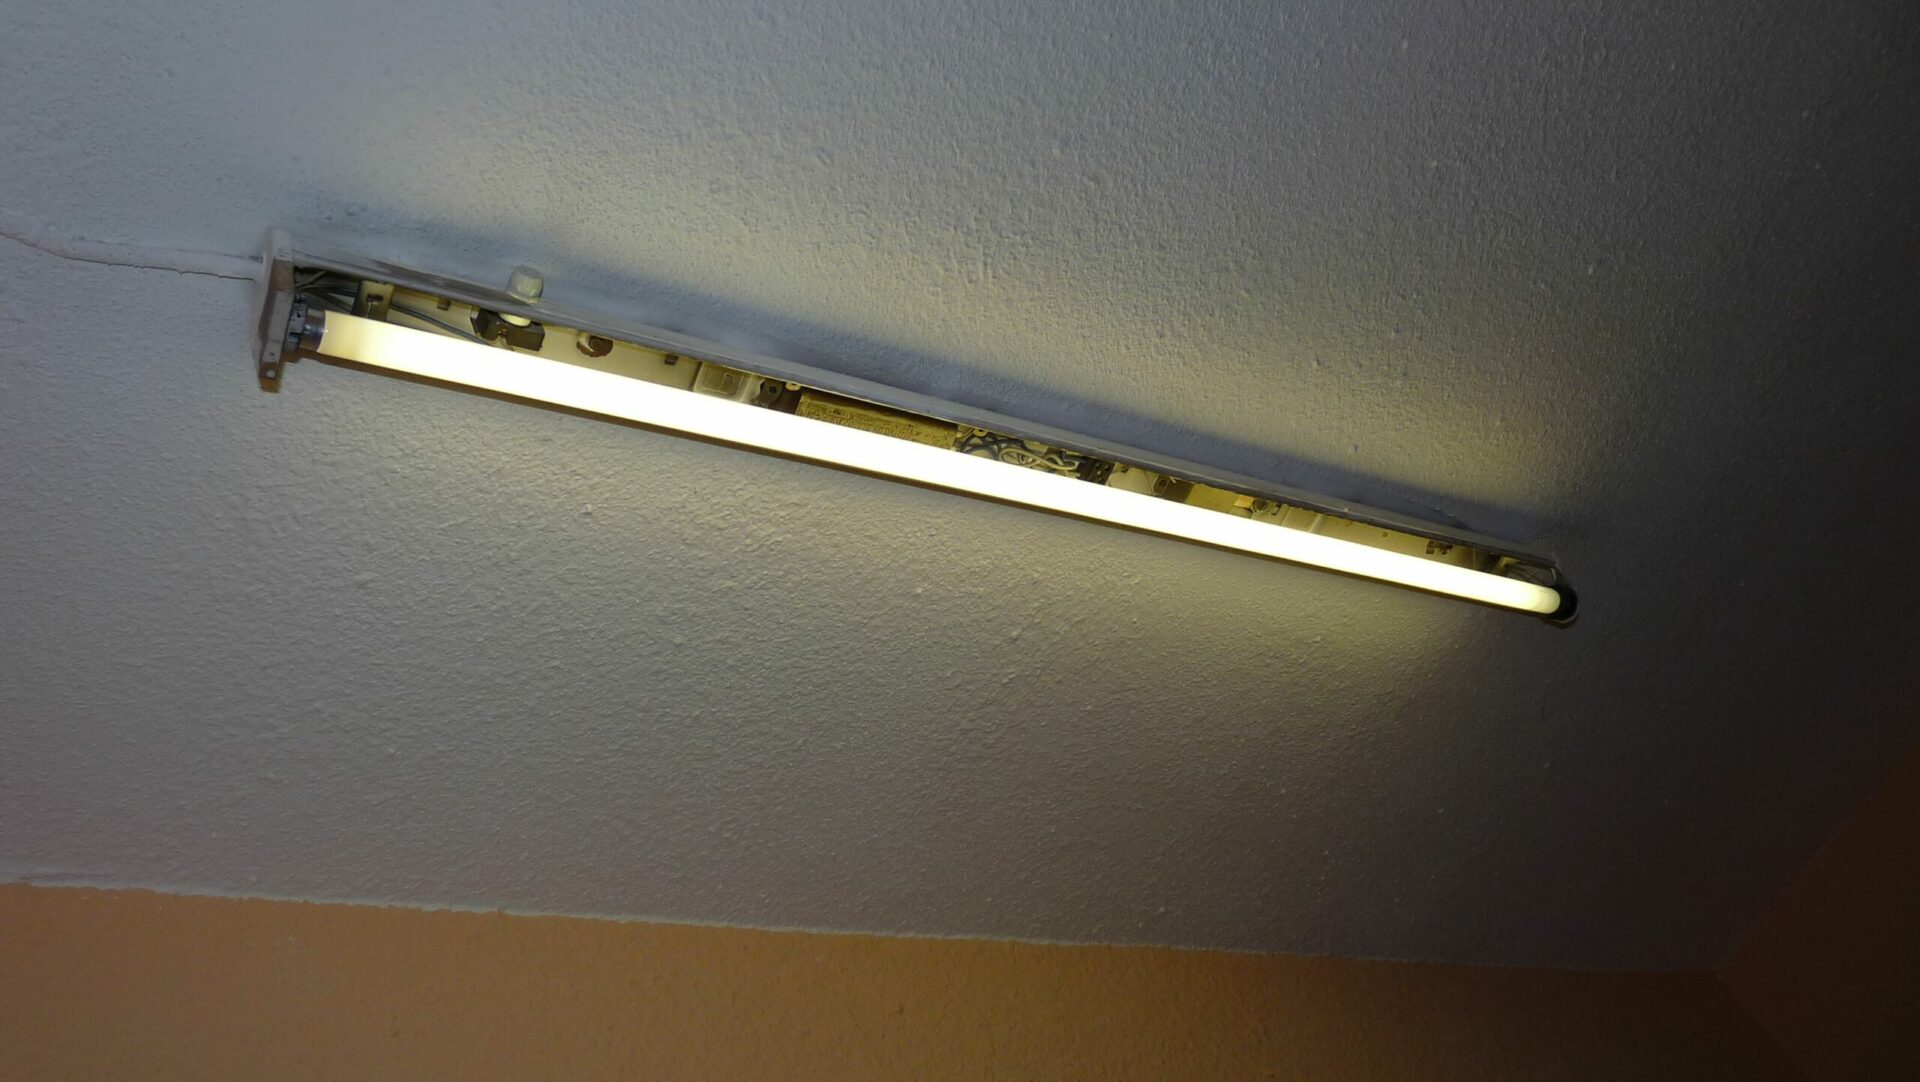 Read more about the article Old fluorescent fixtures pose risk